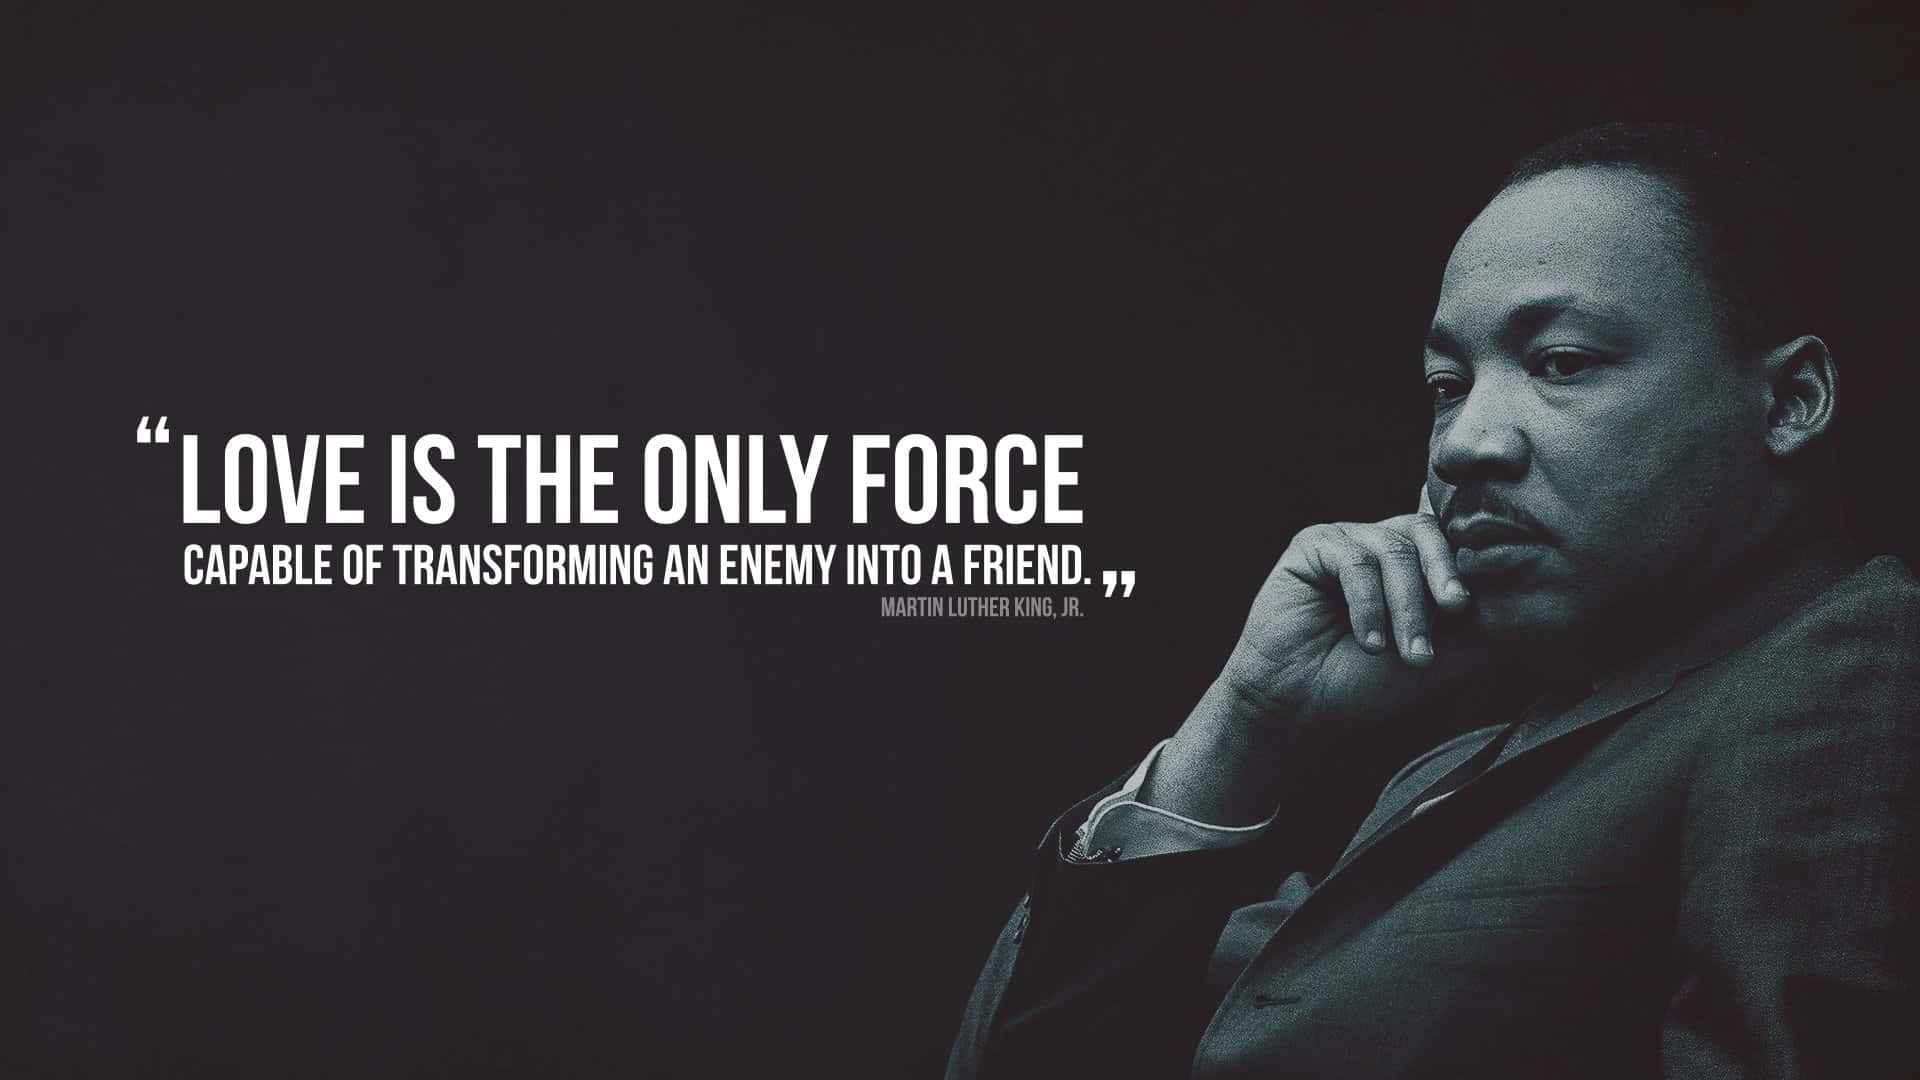 Inspirational Martin Luther King Poster Wallpaper